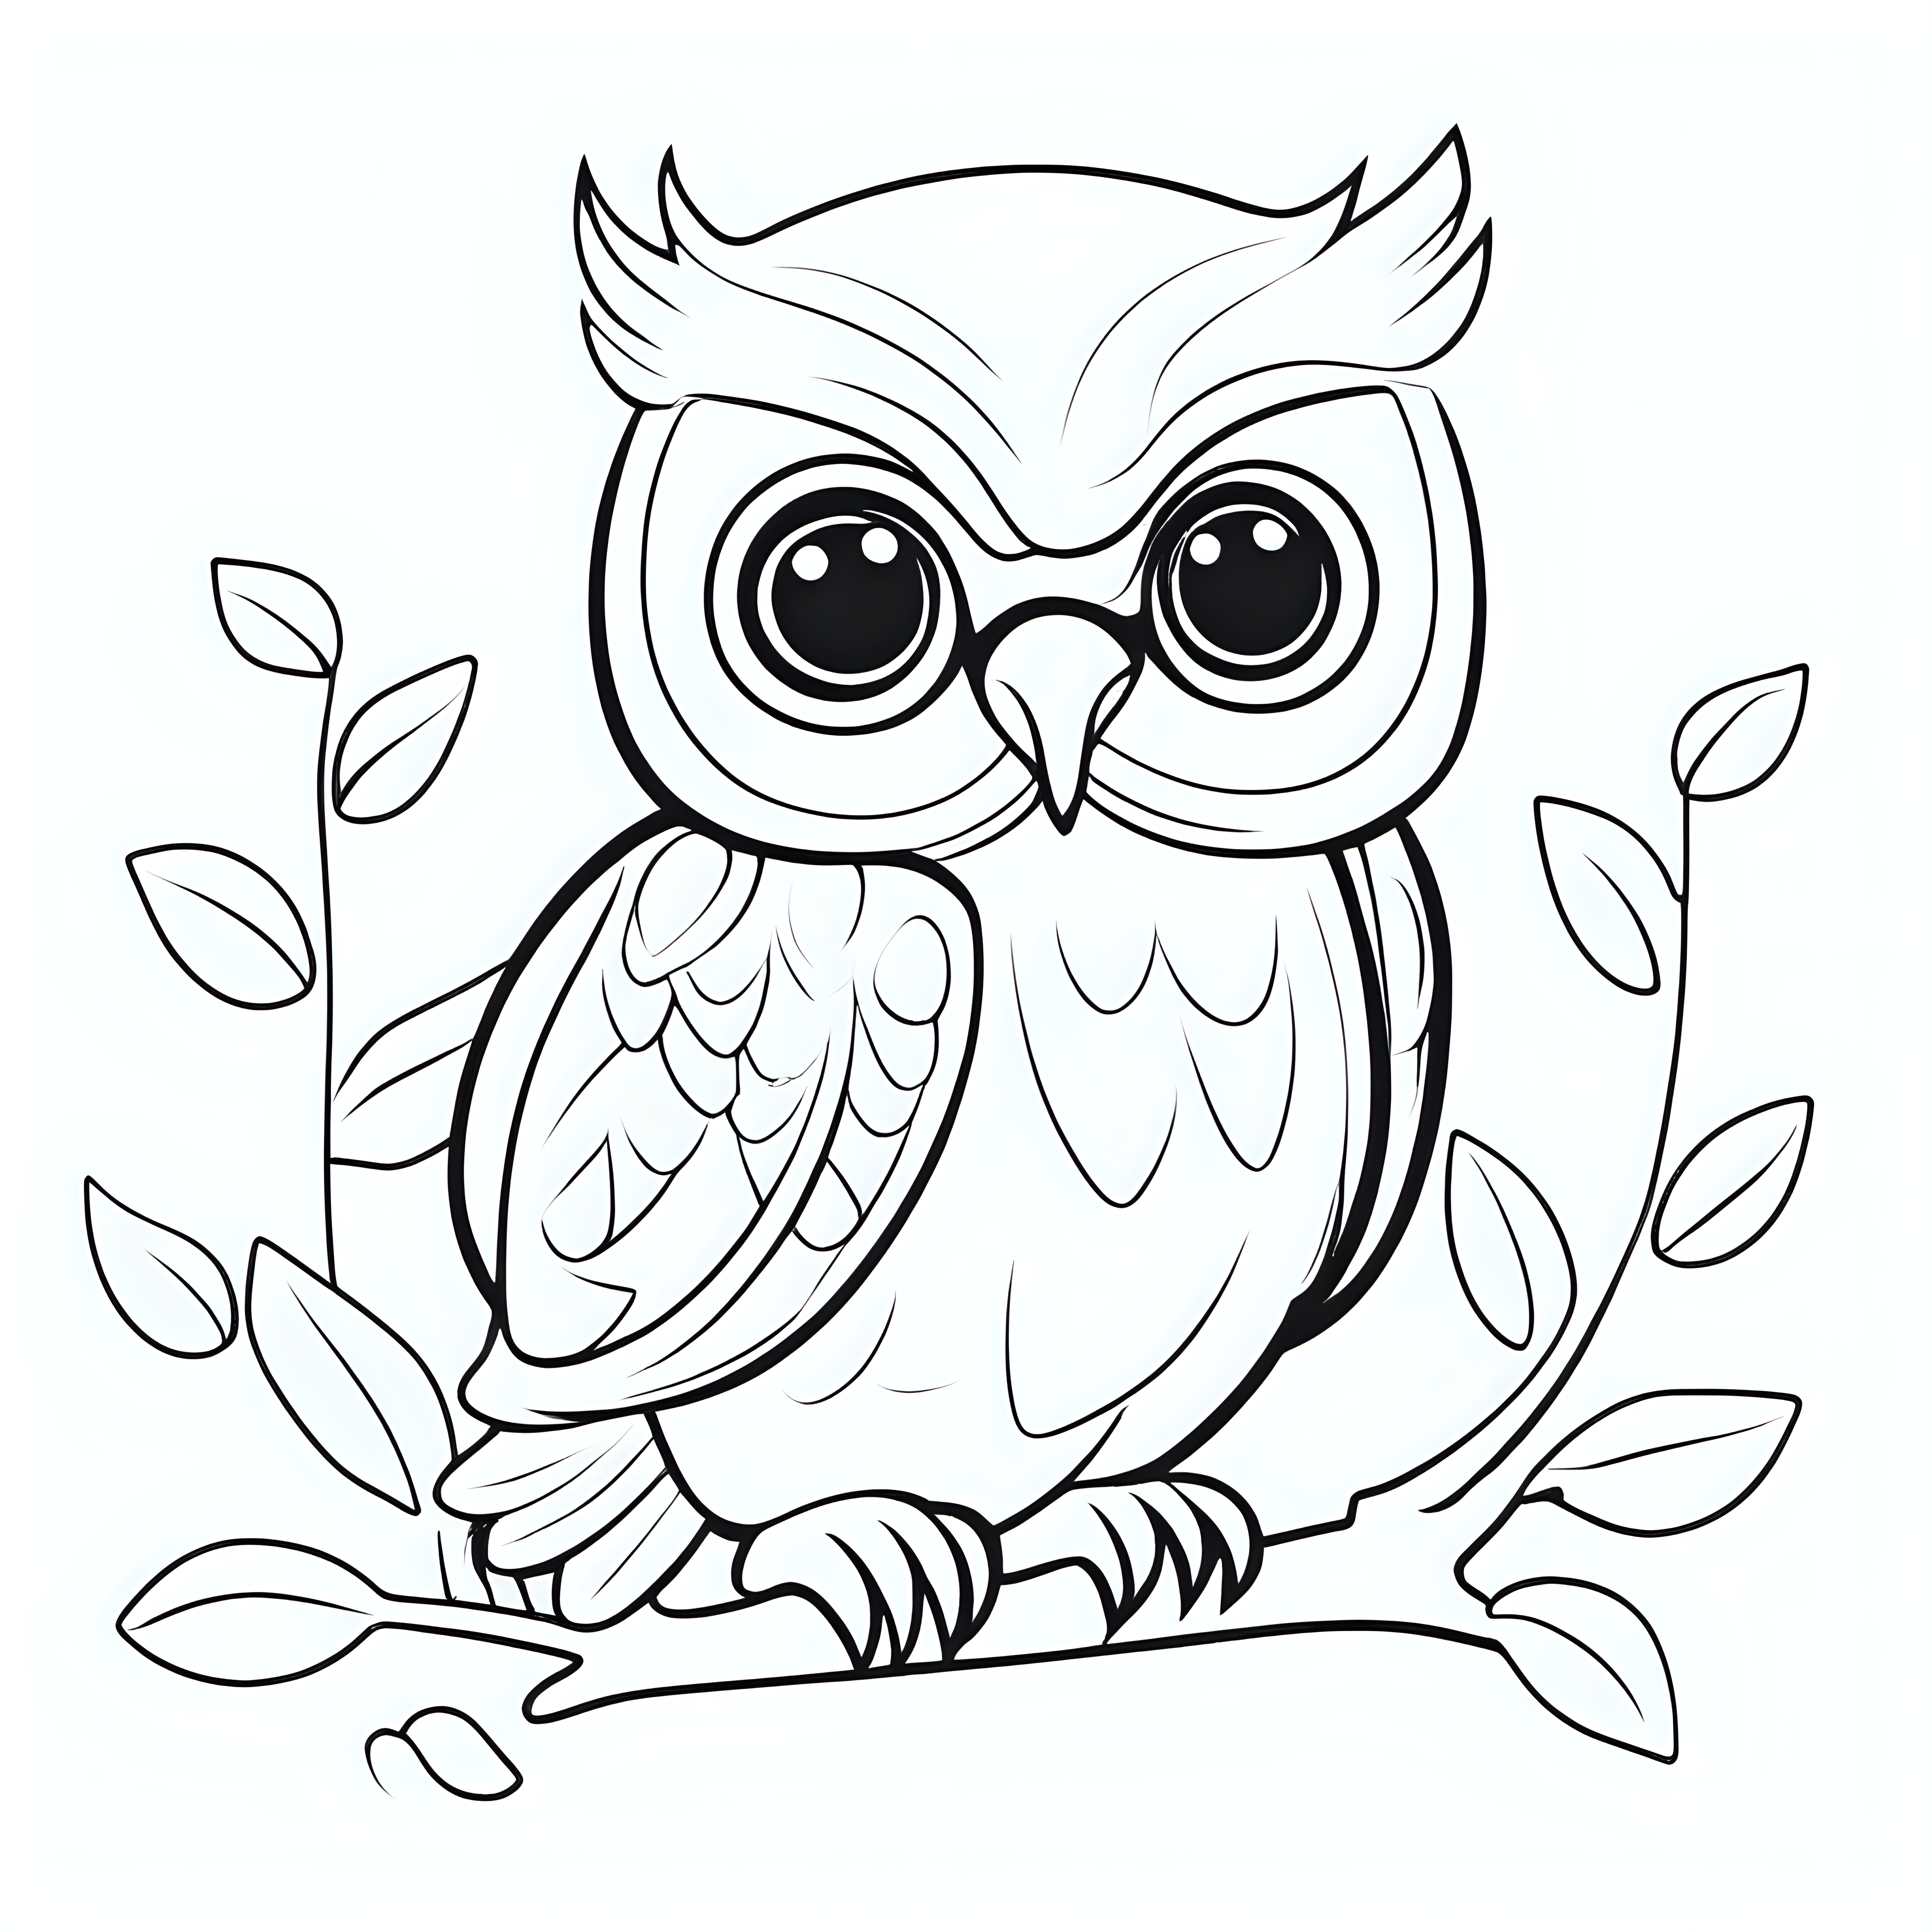 Create a cute baby owl, outline in black, coloring book for kids